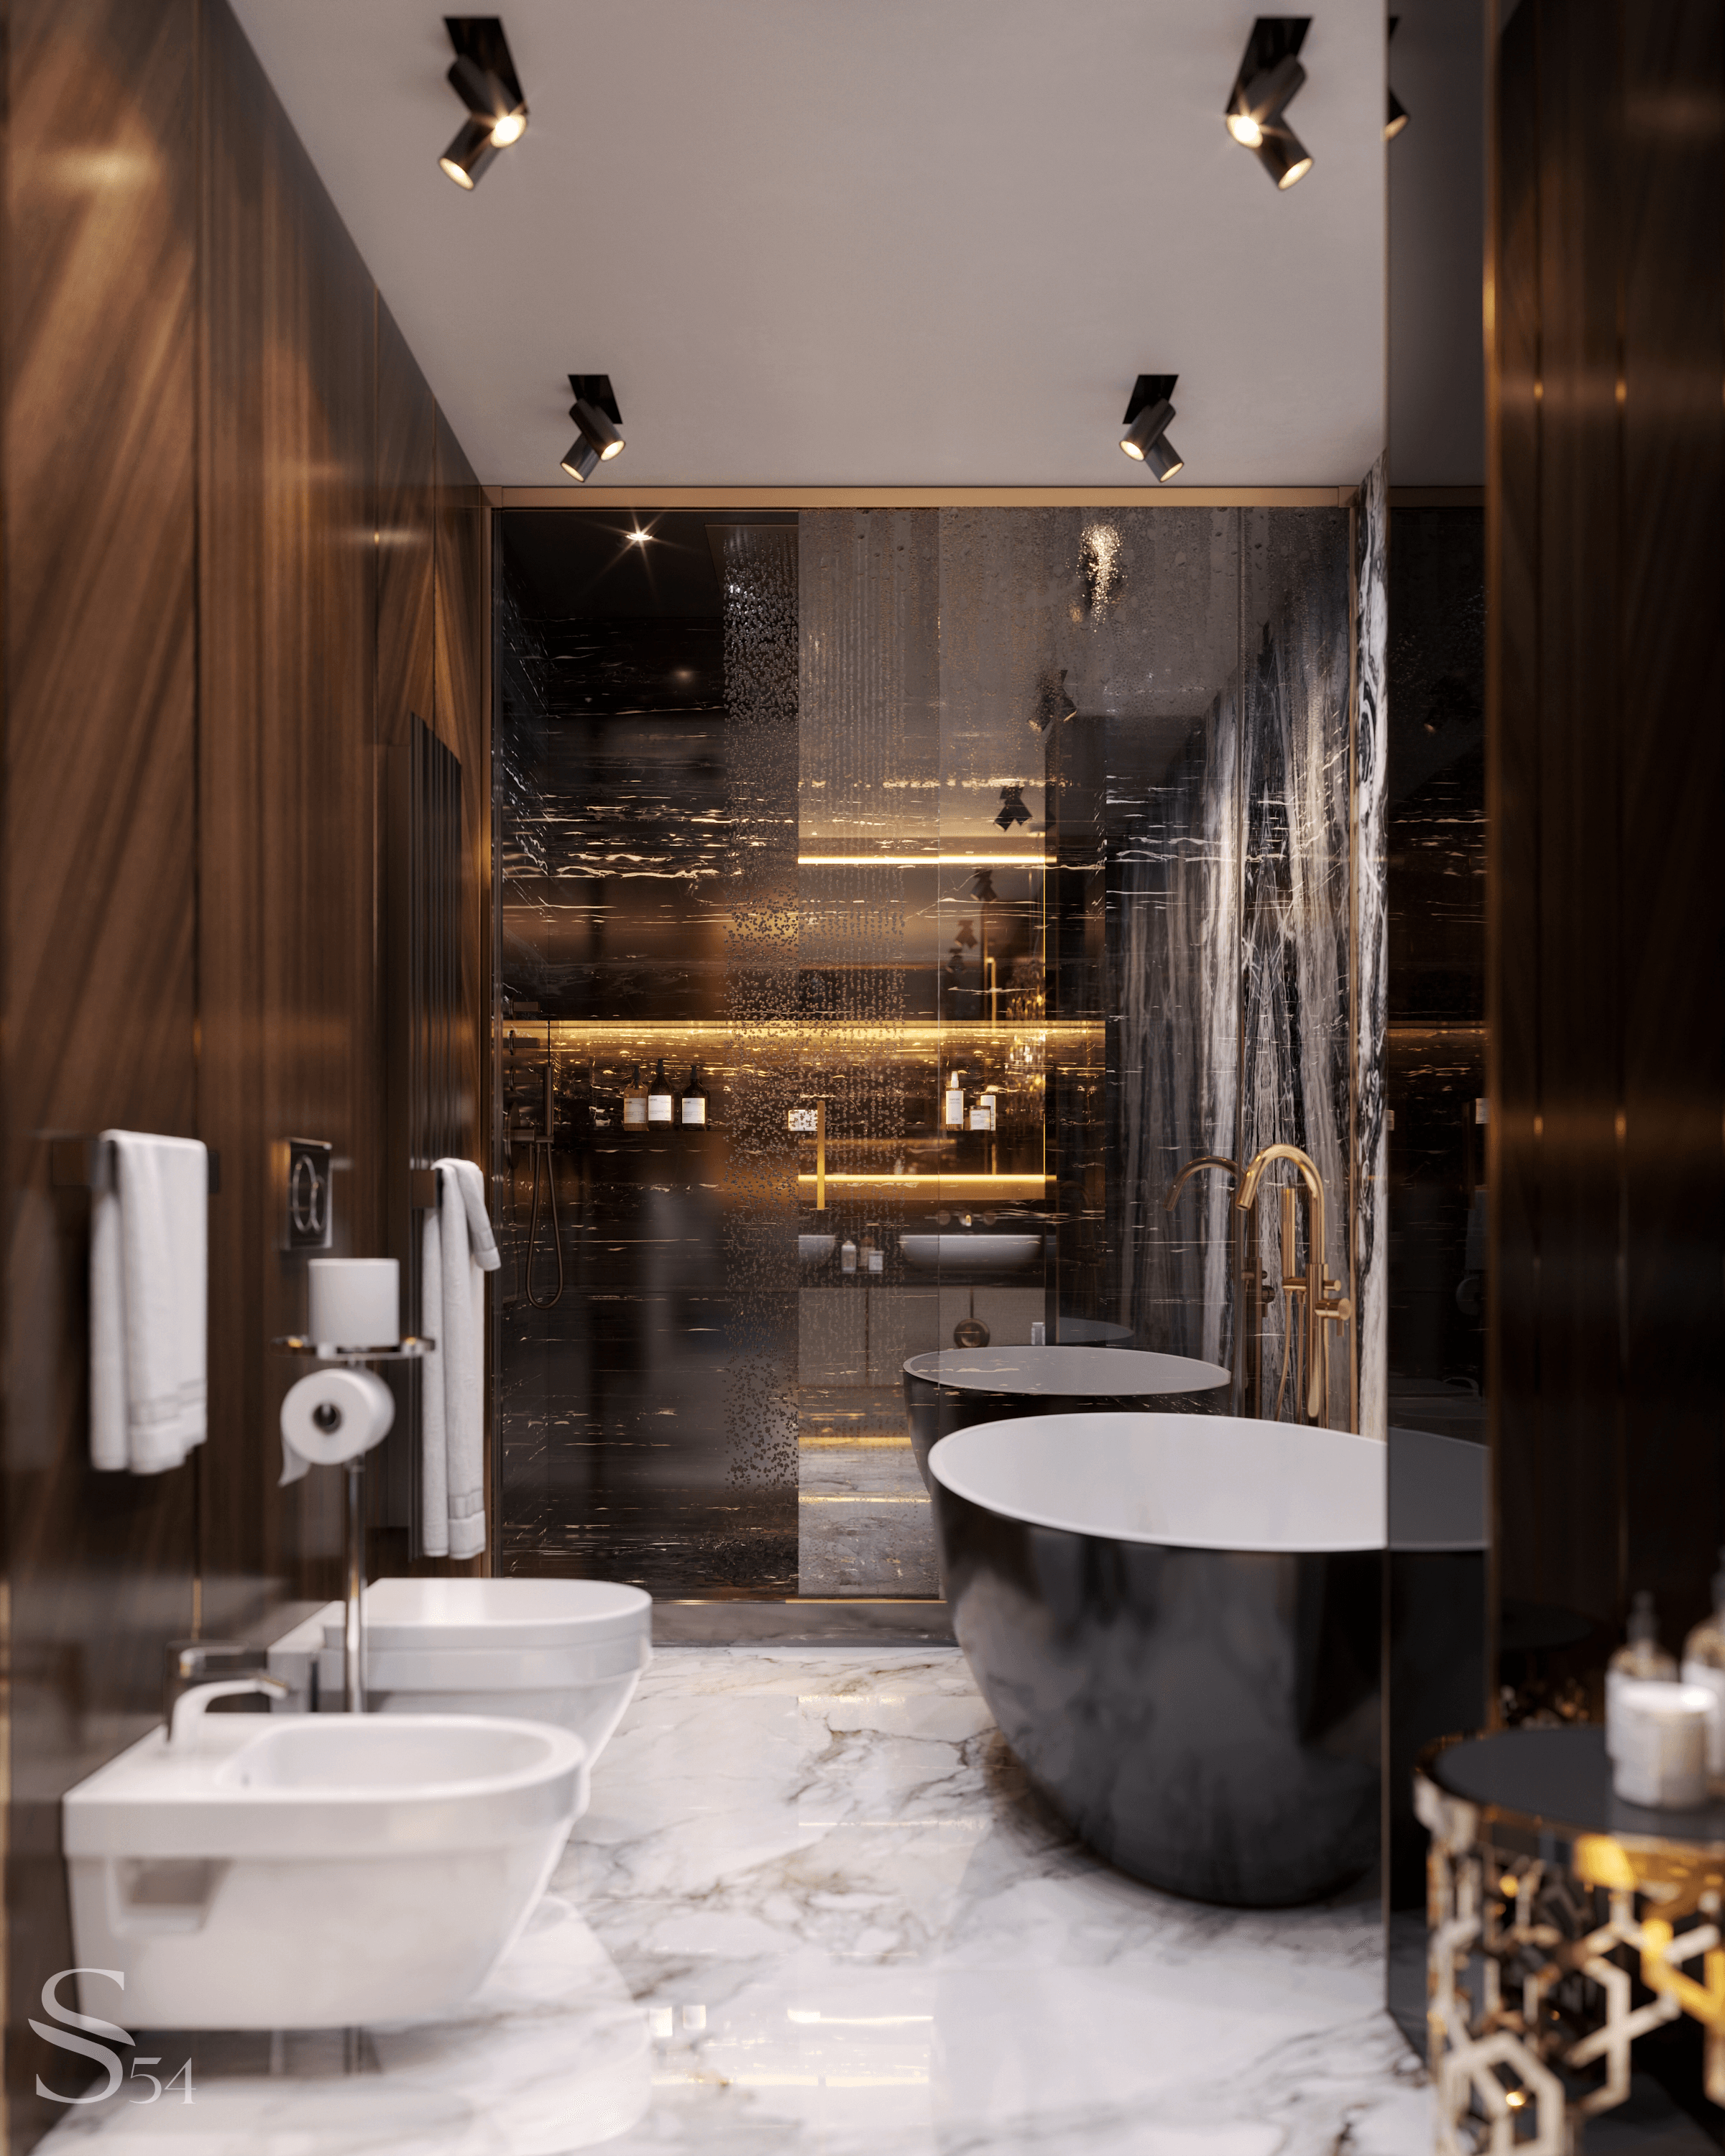 The contrasting combination of white and black marble is highlighted by brass elements